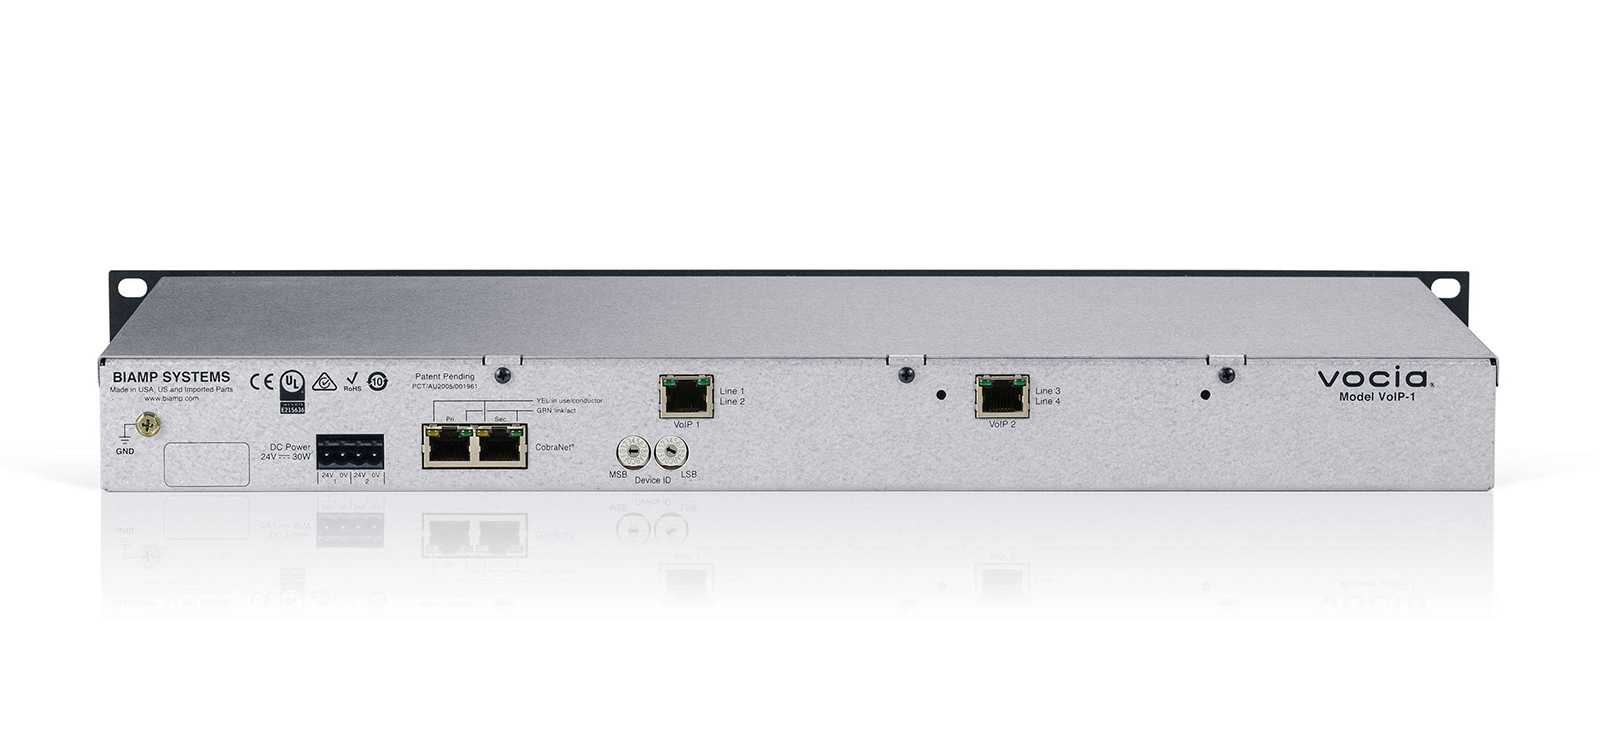 Biamp VOIP-1-2